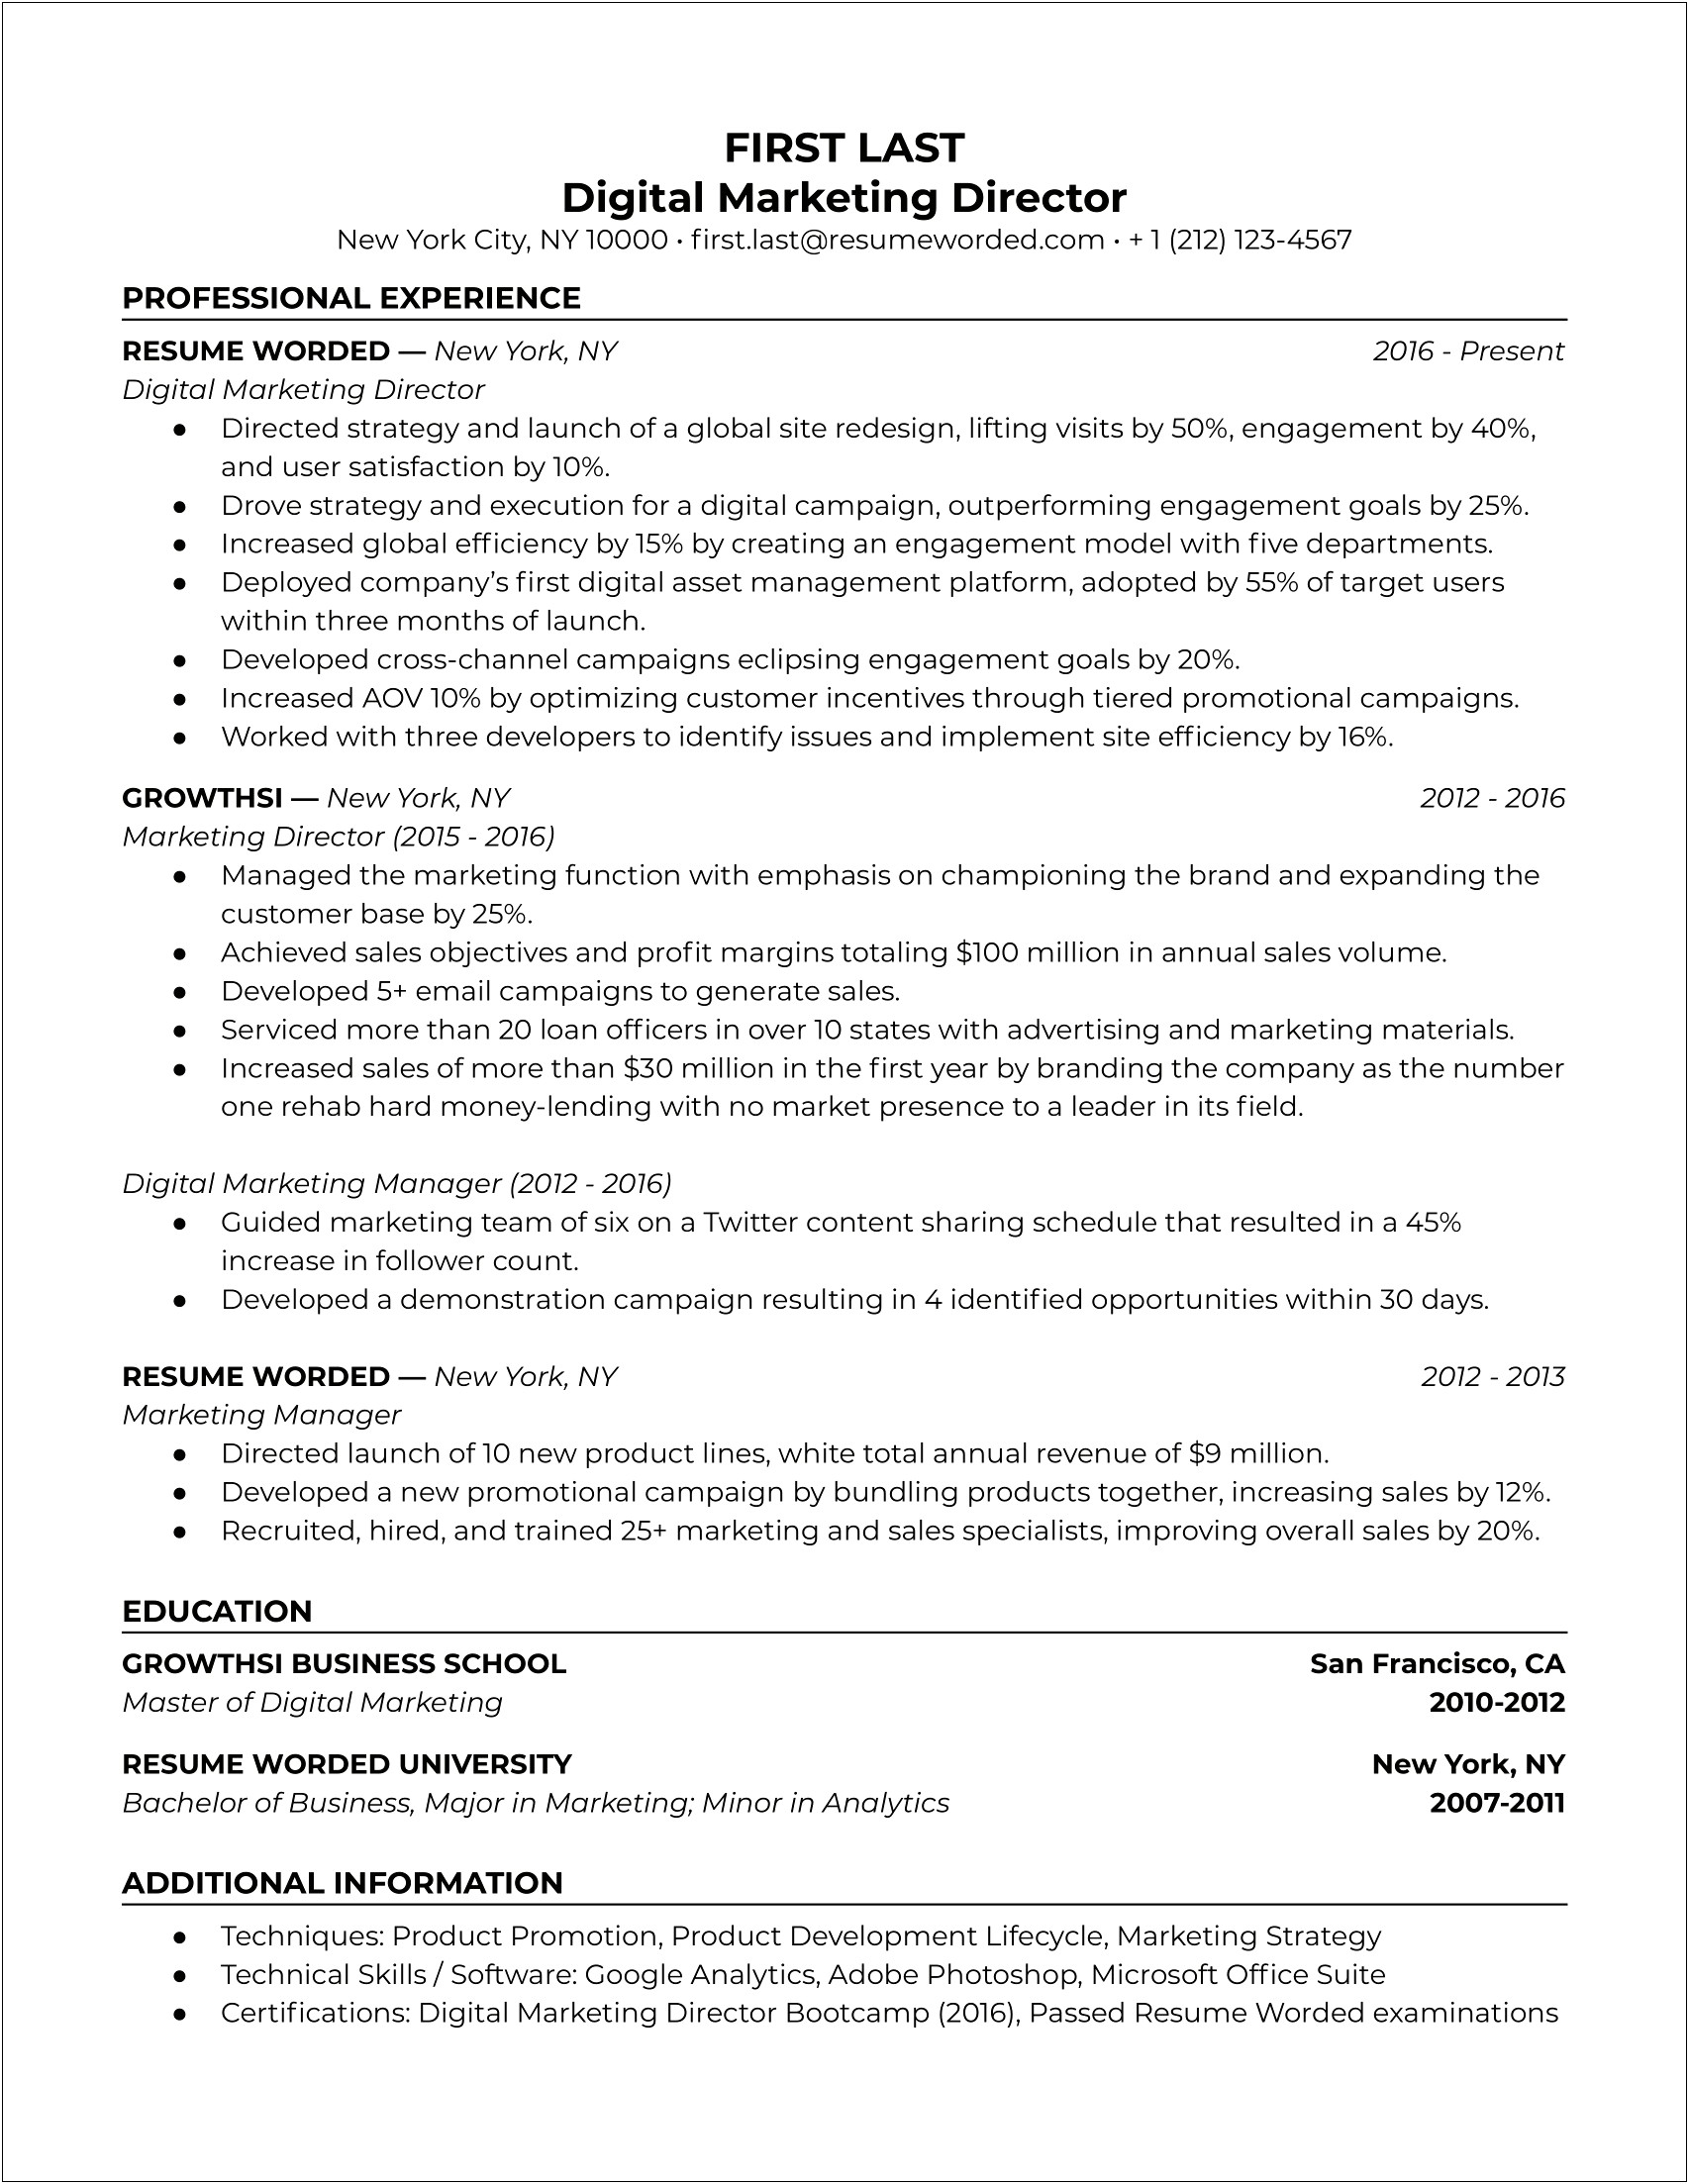 Sample Resume For Marketing Assistance For High School